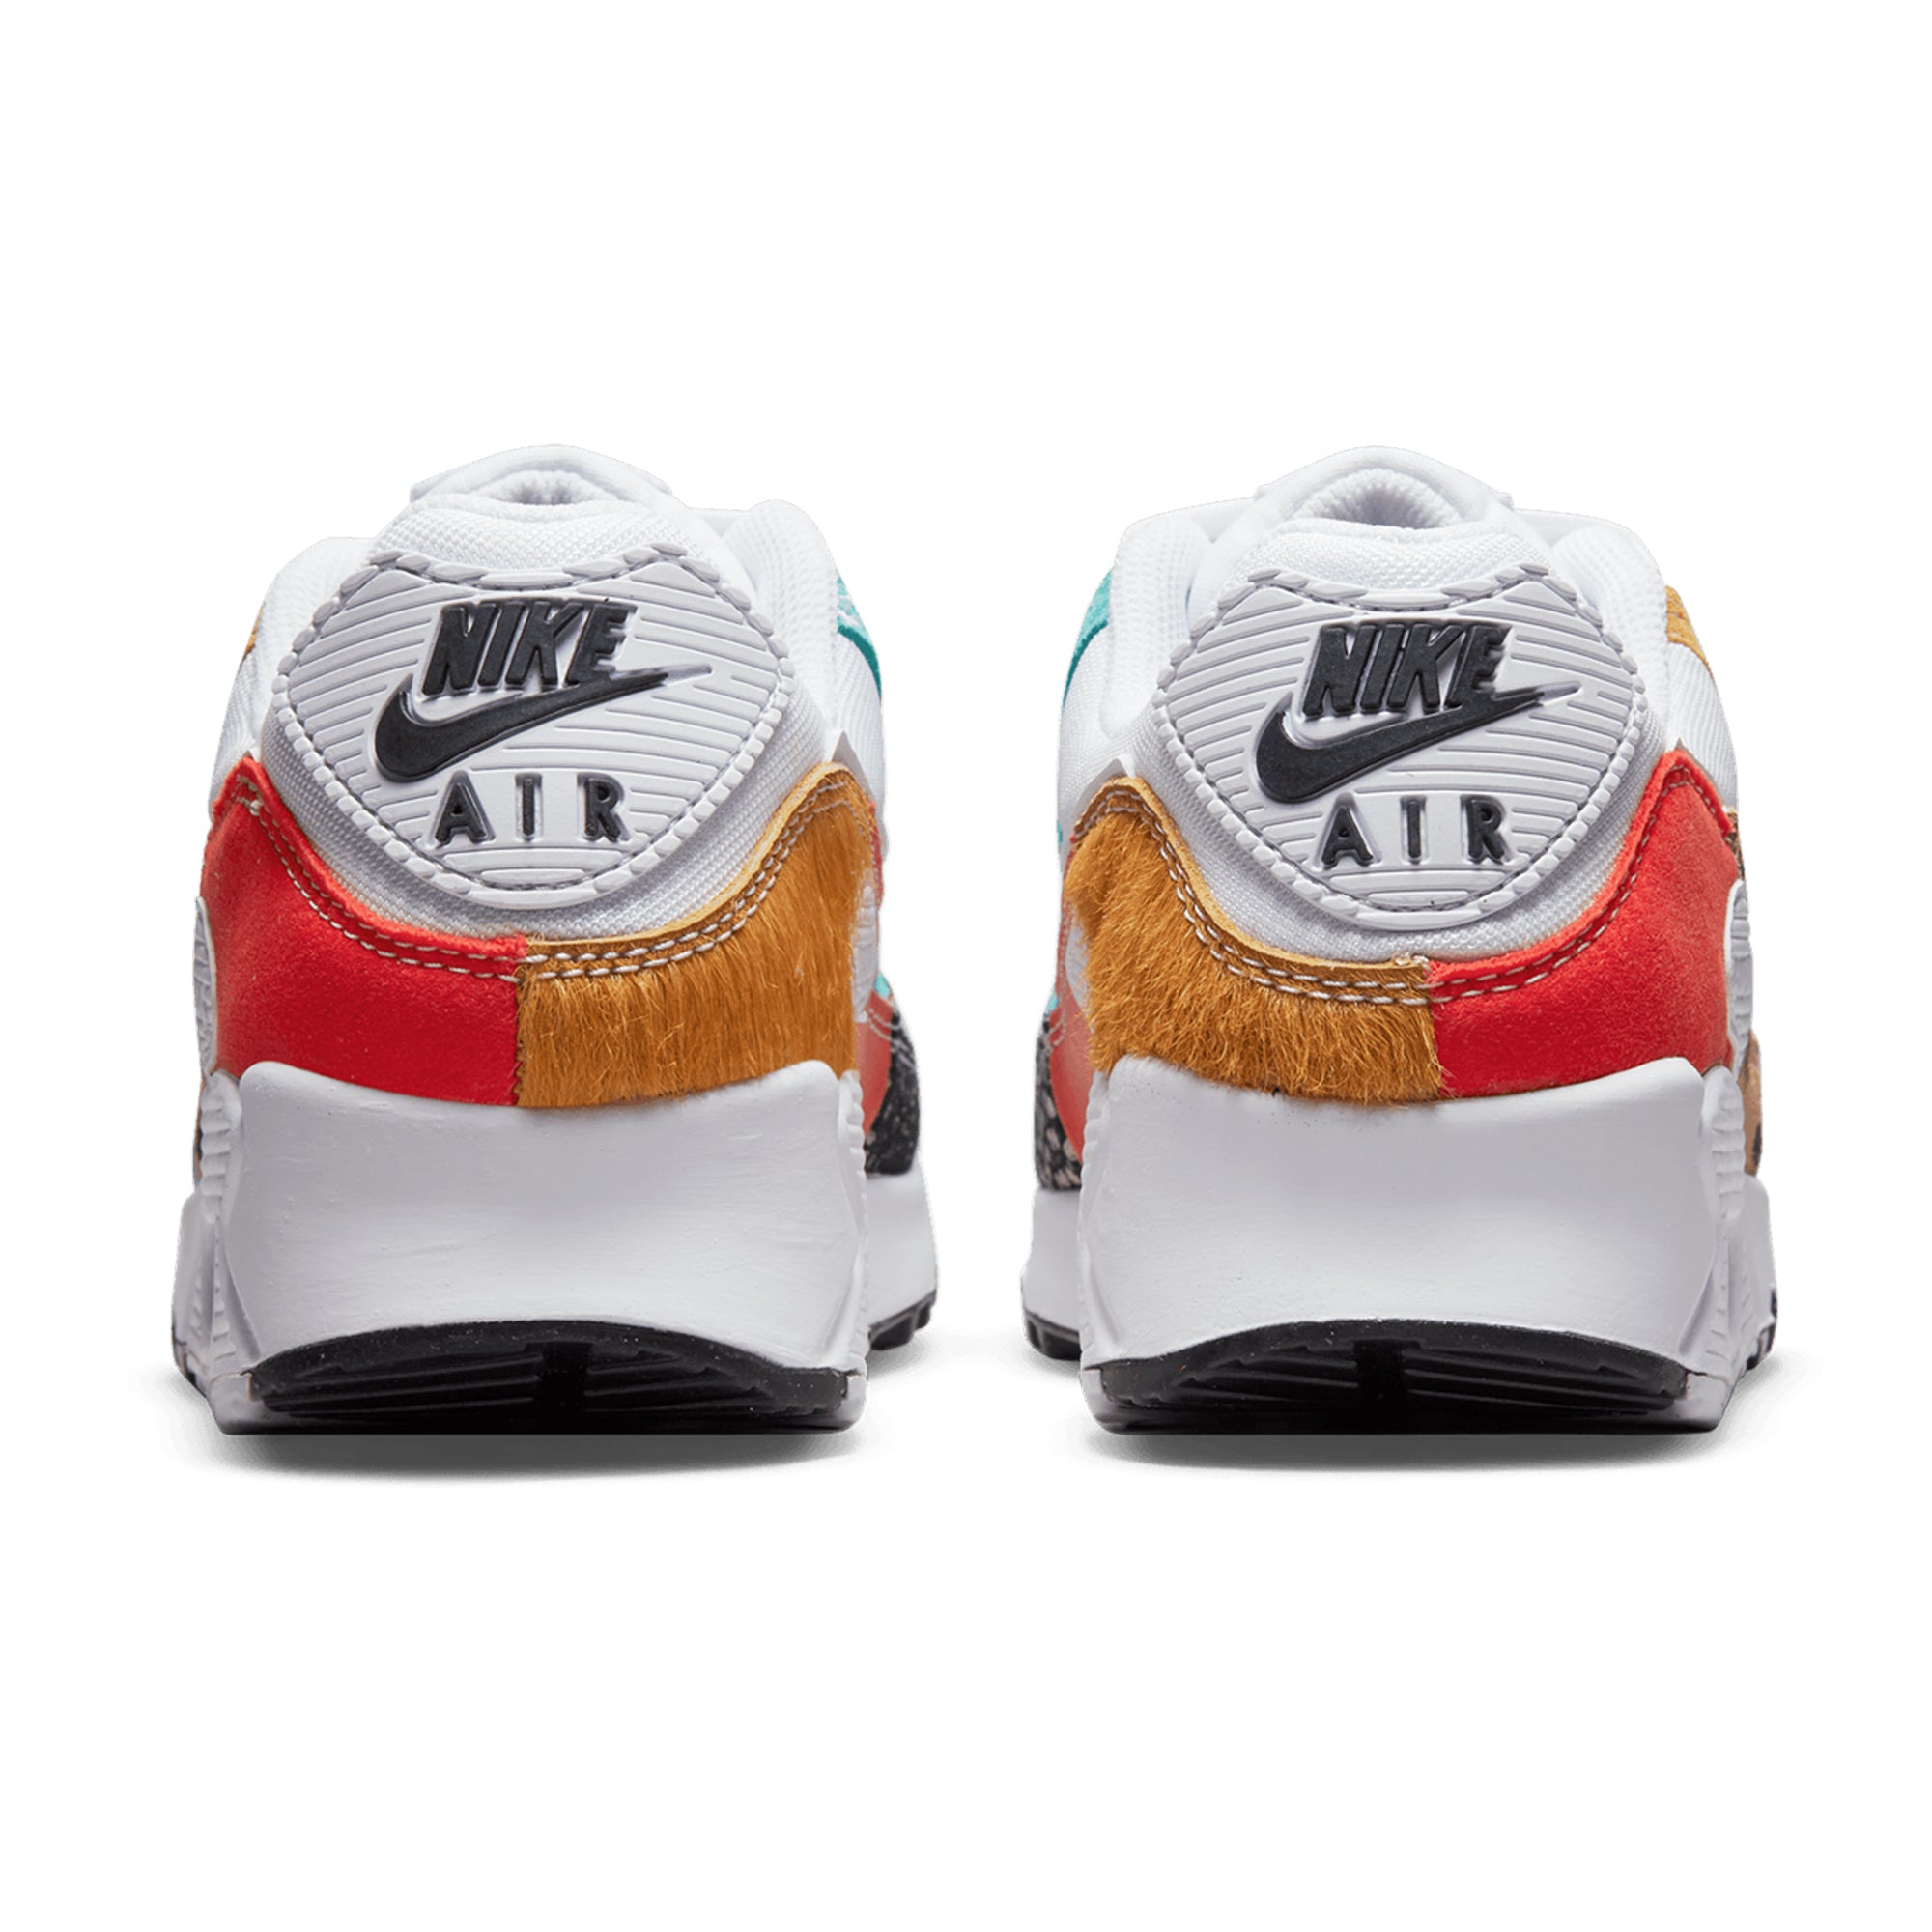 nike flyposite size 14 inches in centimeters - 100 White – De-iceShops -  Women Air Max 90 SE DH5075